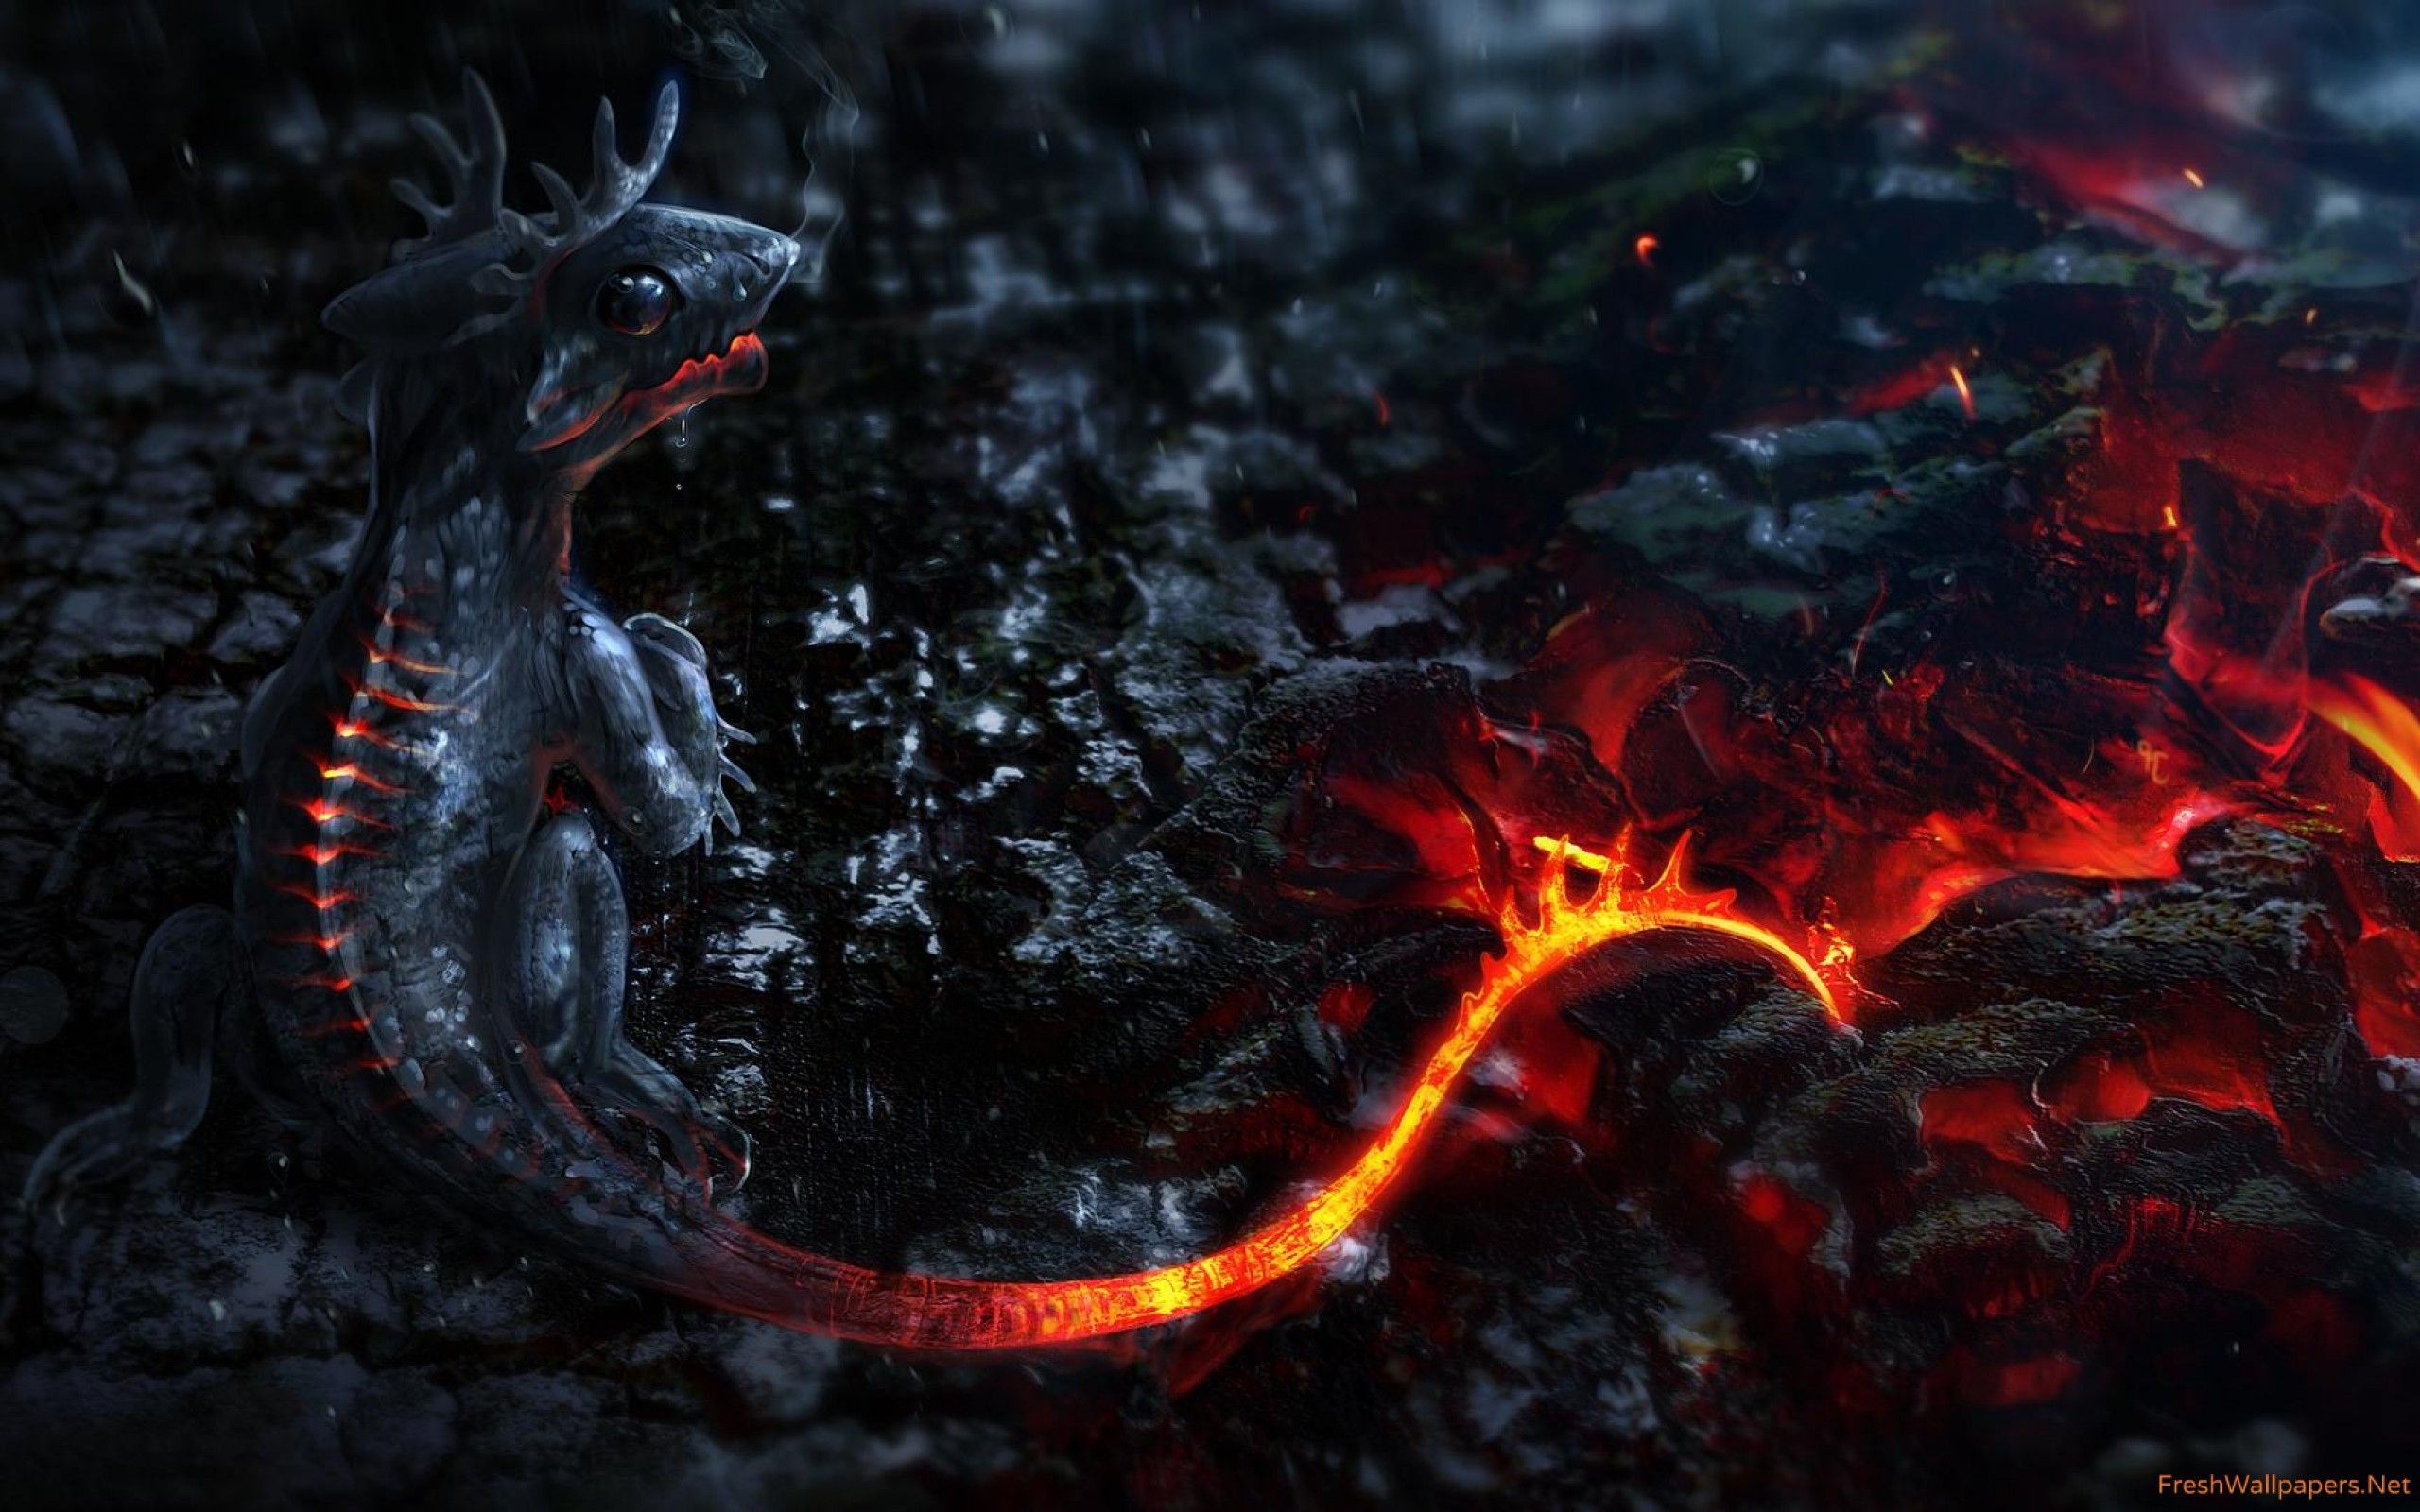 Dragon Background wallpapers | Freshwallpapers